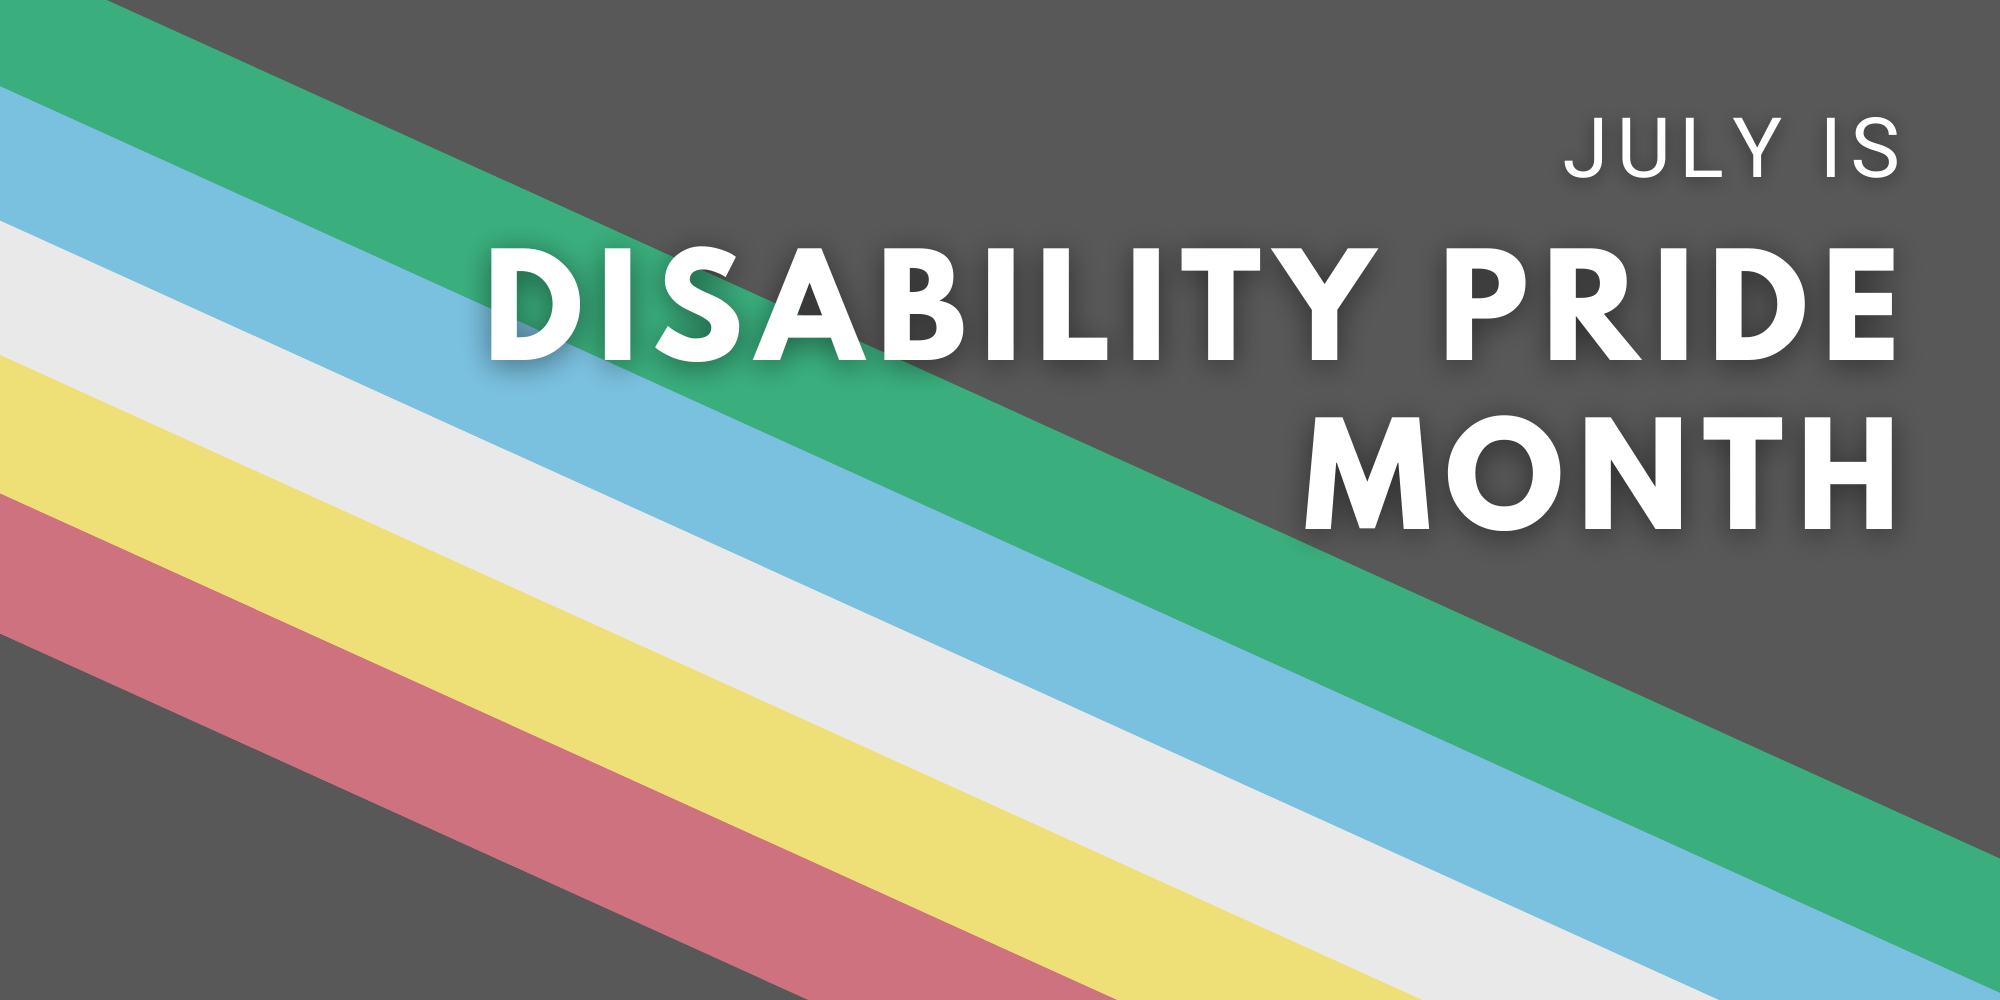 A banner of the new disability pride flag with muted green, blue, white, yellow and red stripes set horizontally on a muted gray background, with the words "July is Disability Pride Month" on top.